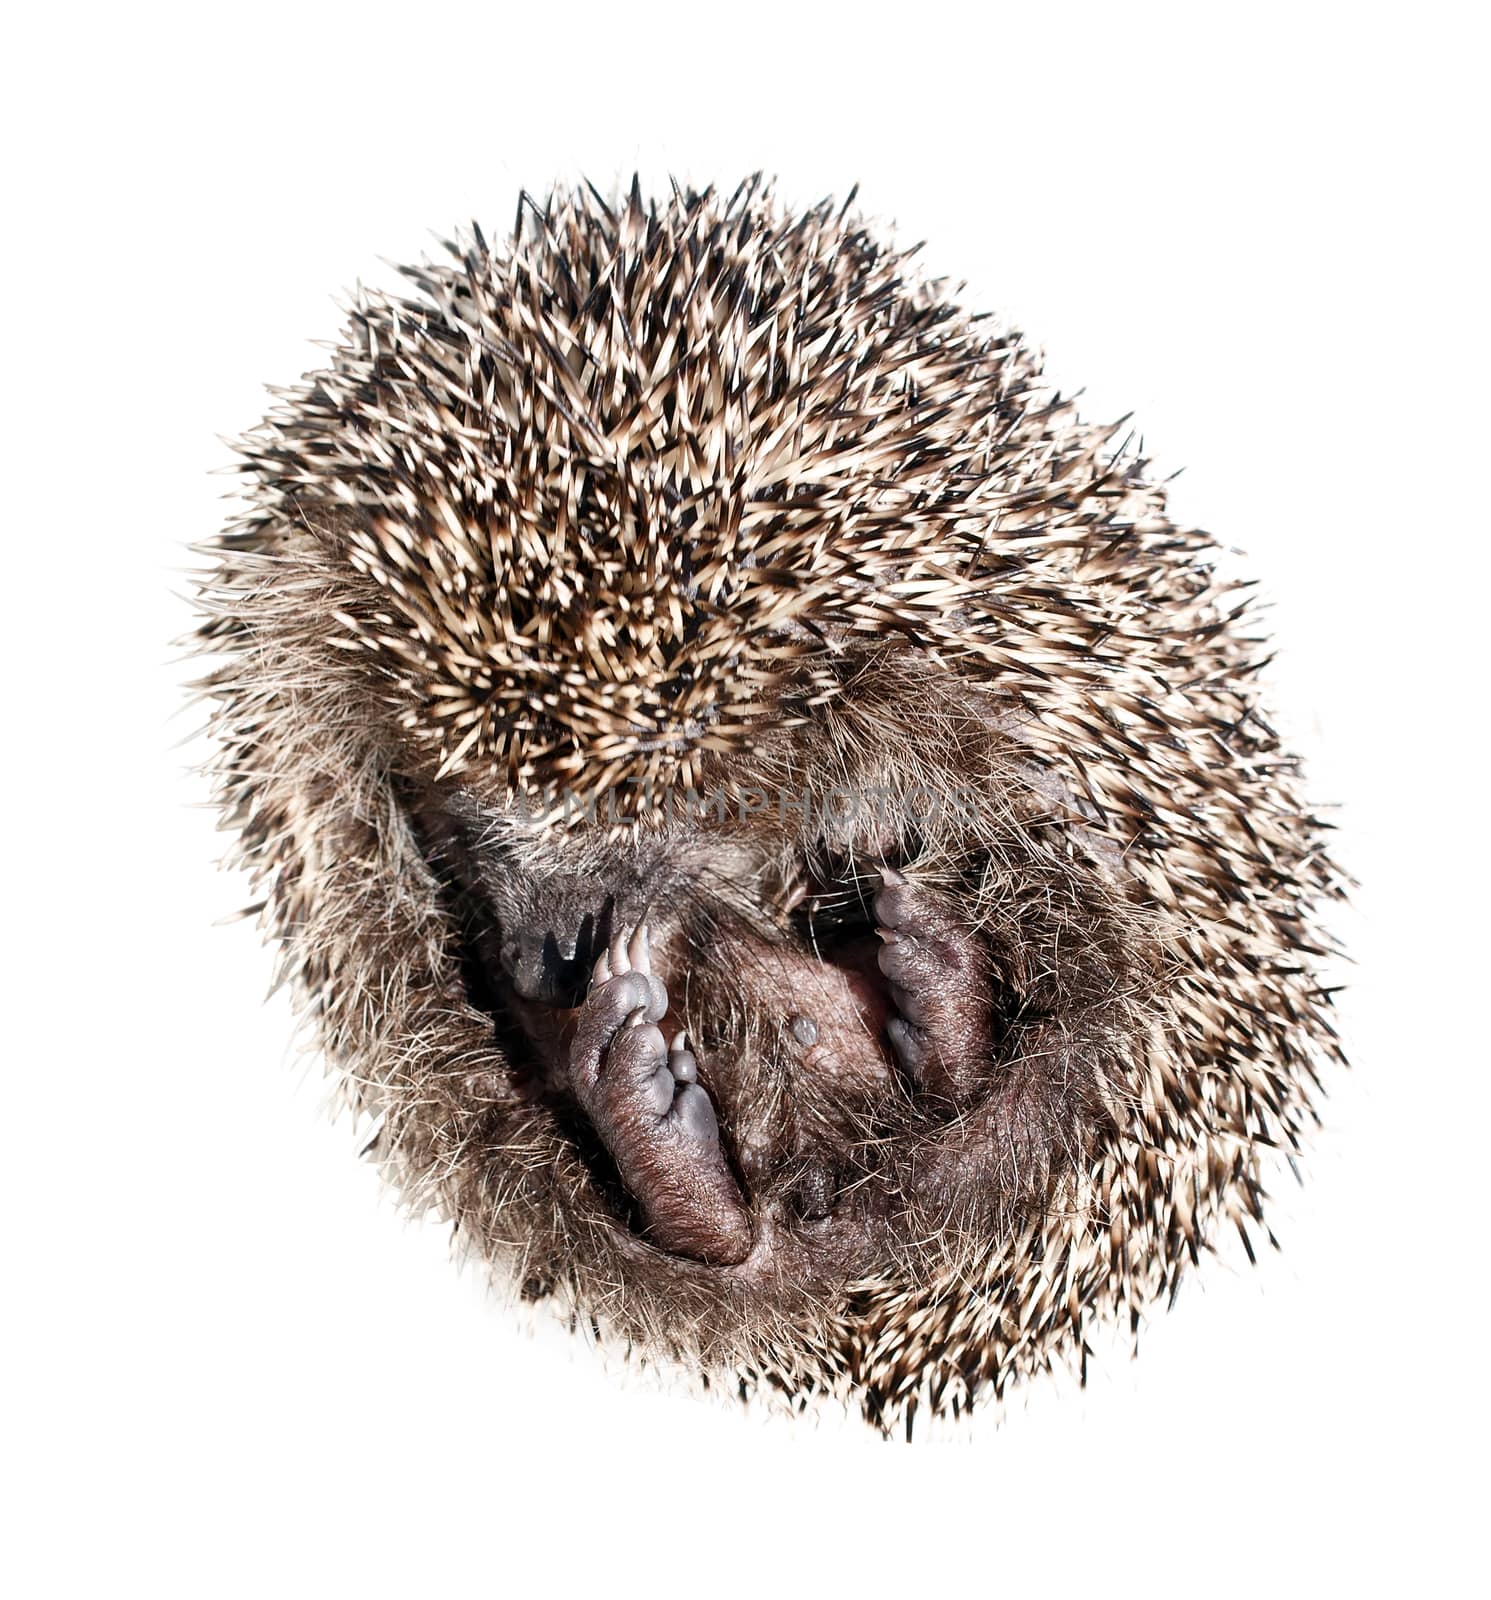 Eurasian hedgehog curled up into a ball on a white background